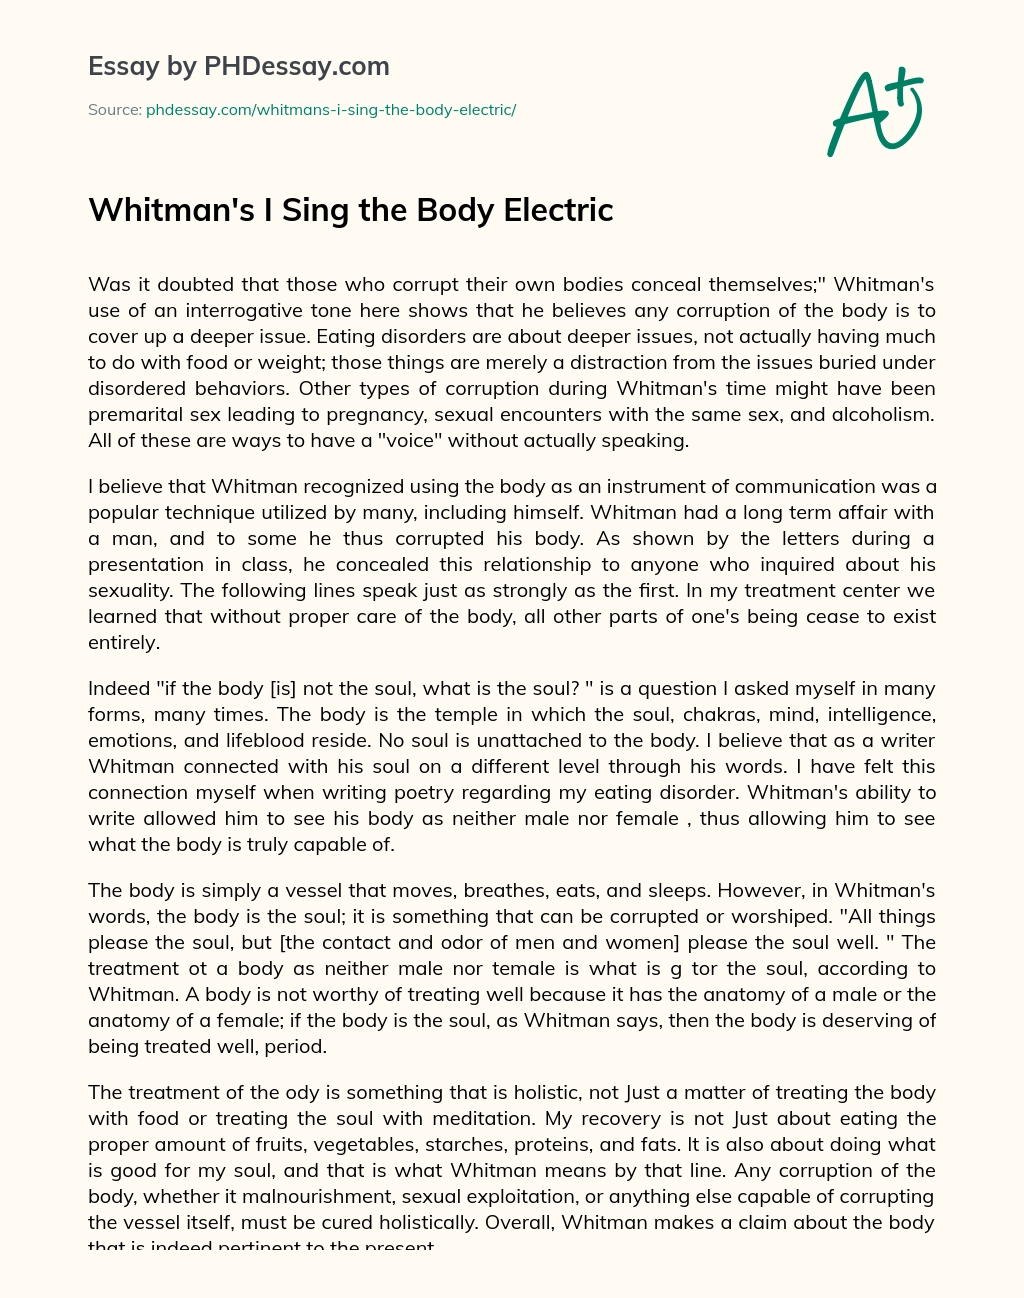 Whitman’s I Sing the Body Electric essay